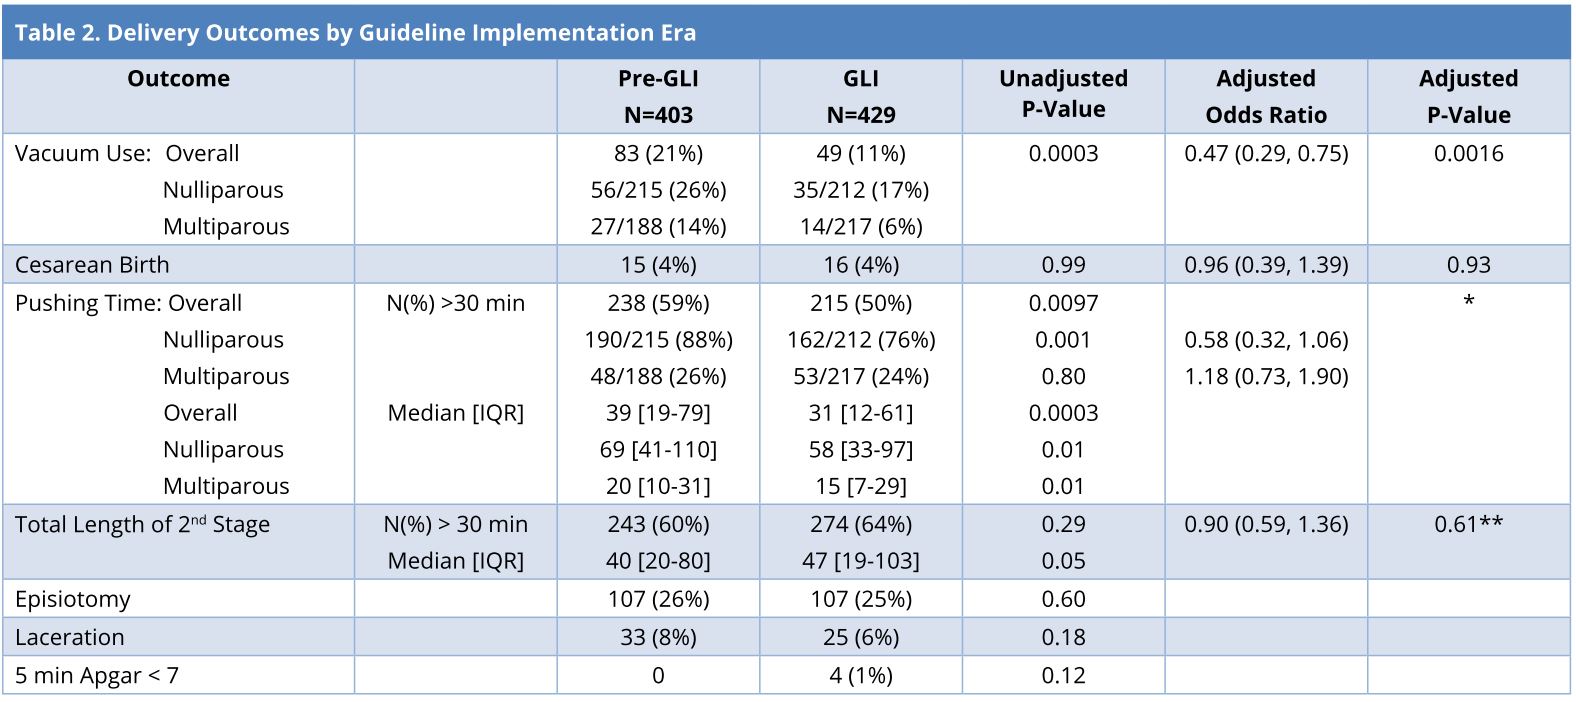 Table 2.JPGDelivery outcomes by guideline implementation era.<br><sub>Times measured in minutes. The associations between GLI era and categorical outcomes were first considered using Chi-square tests, then using multivariable logistic regression. The associations between the GLI with continuous pushing time and total length of the second stage were also considered using Wilcoxon rank sum tests.<br> Covariates included in adjusted models: GLI era, parity, age, gestational age, time delayed pushing.<br> *The interaction between GLI and parity was found to be nearly significant and was included in the final model for pushing time > 30 minutes. Thus odds ratios are reported separately by parity. <br> **Due to the nature of the relationship between time delayed pushing and long length of the 2nd stage, the adjusted model for this outcome included delayed yes/no. </sub></br>